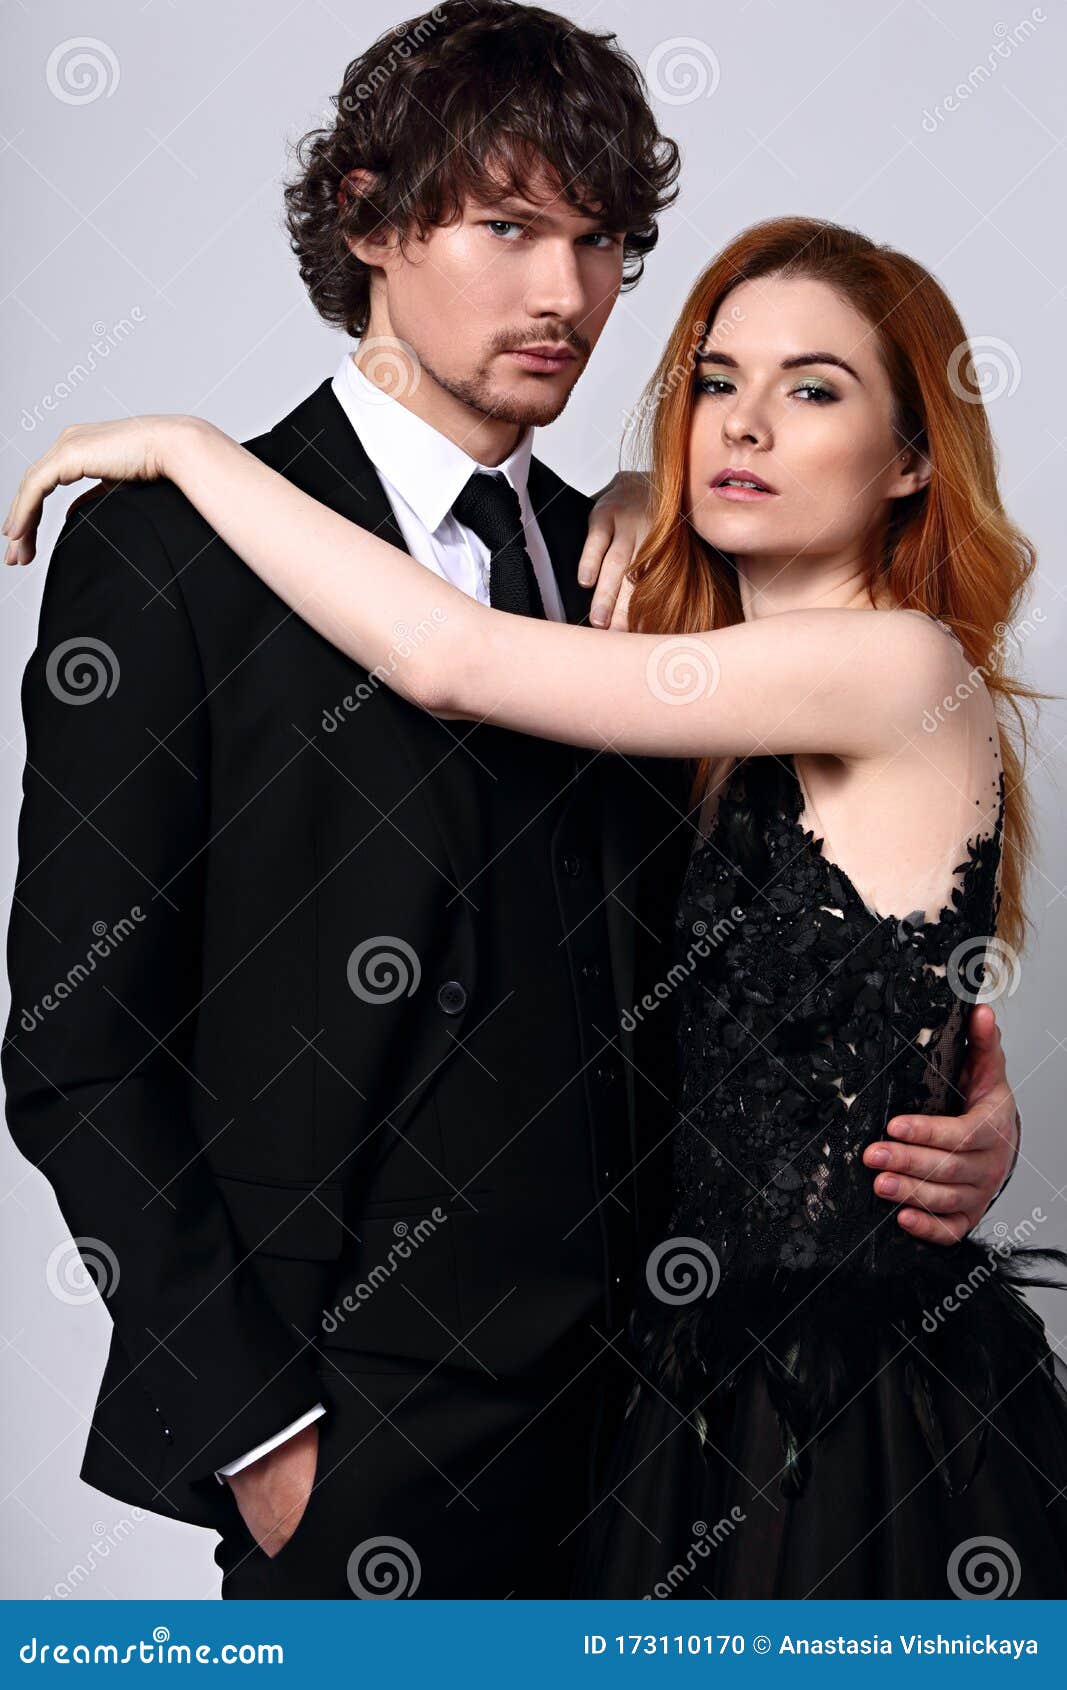 Bright Foxy Hairstyle Female Woman in Fashion Black Long Skirt Dress  Hugging Her Handsome Man in Black Suit Clothing on Light Stock Photo -  Image of hair, love: 173110170